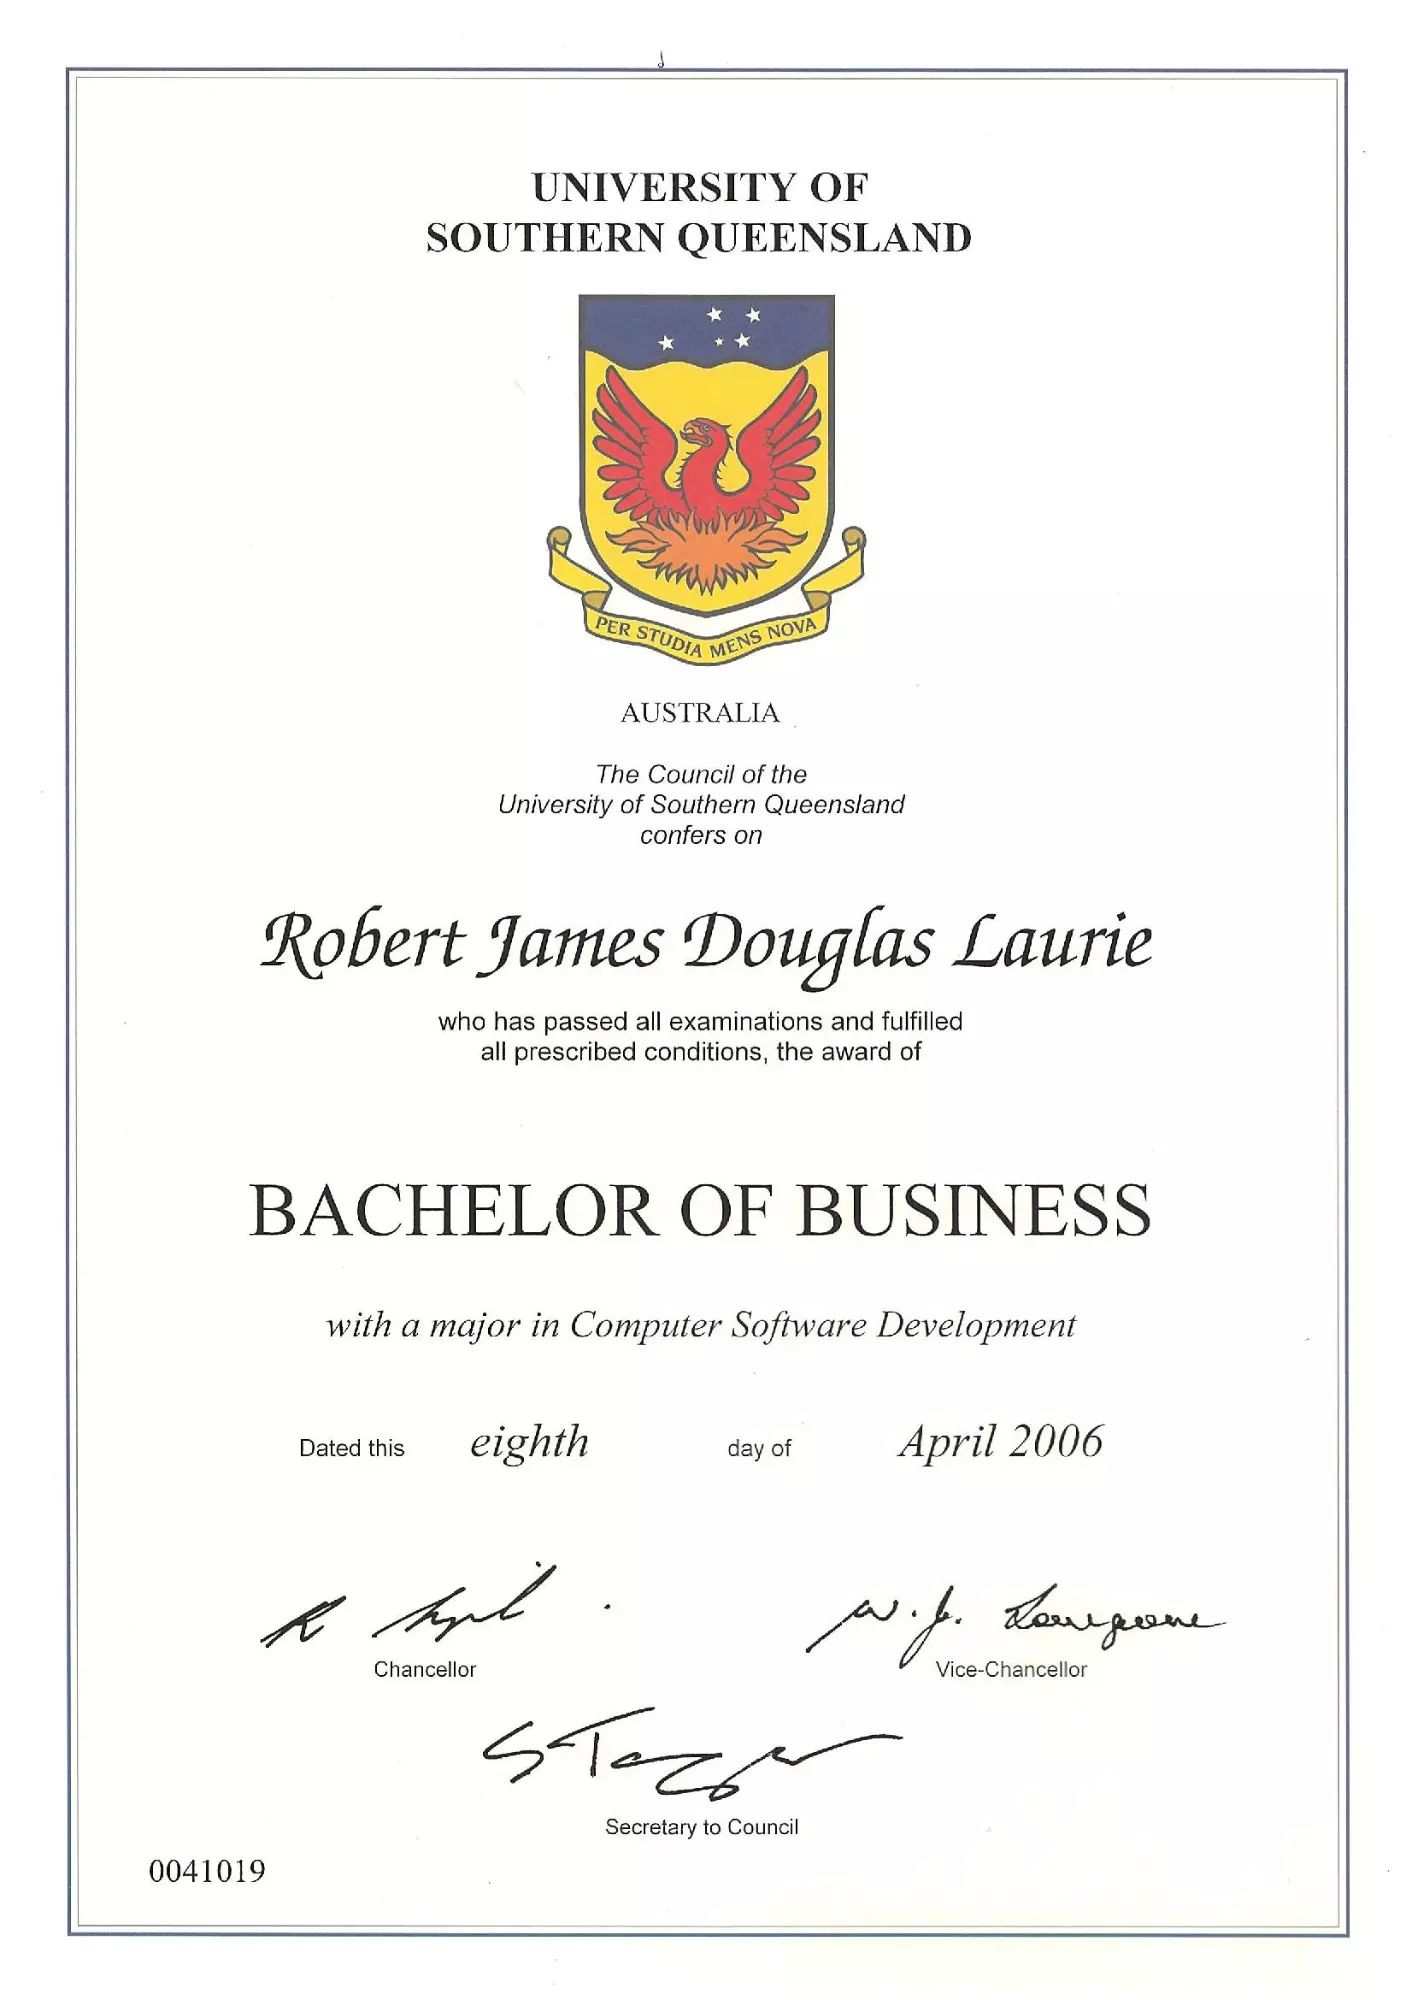 Bachelor of Business Certificate